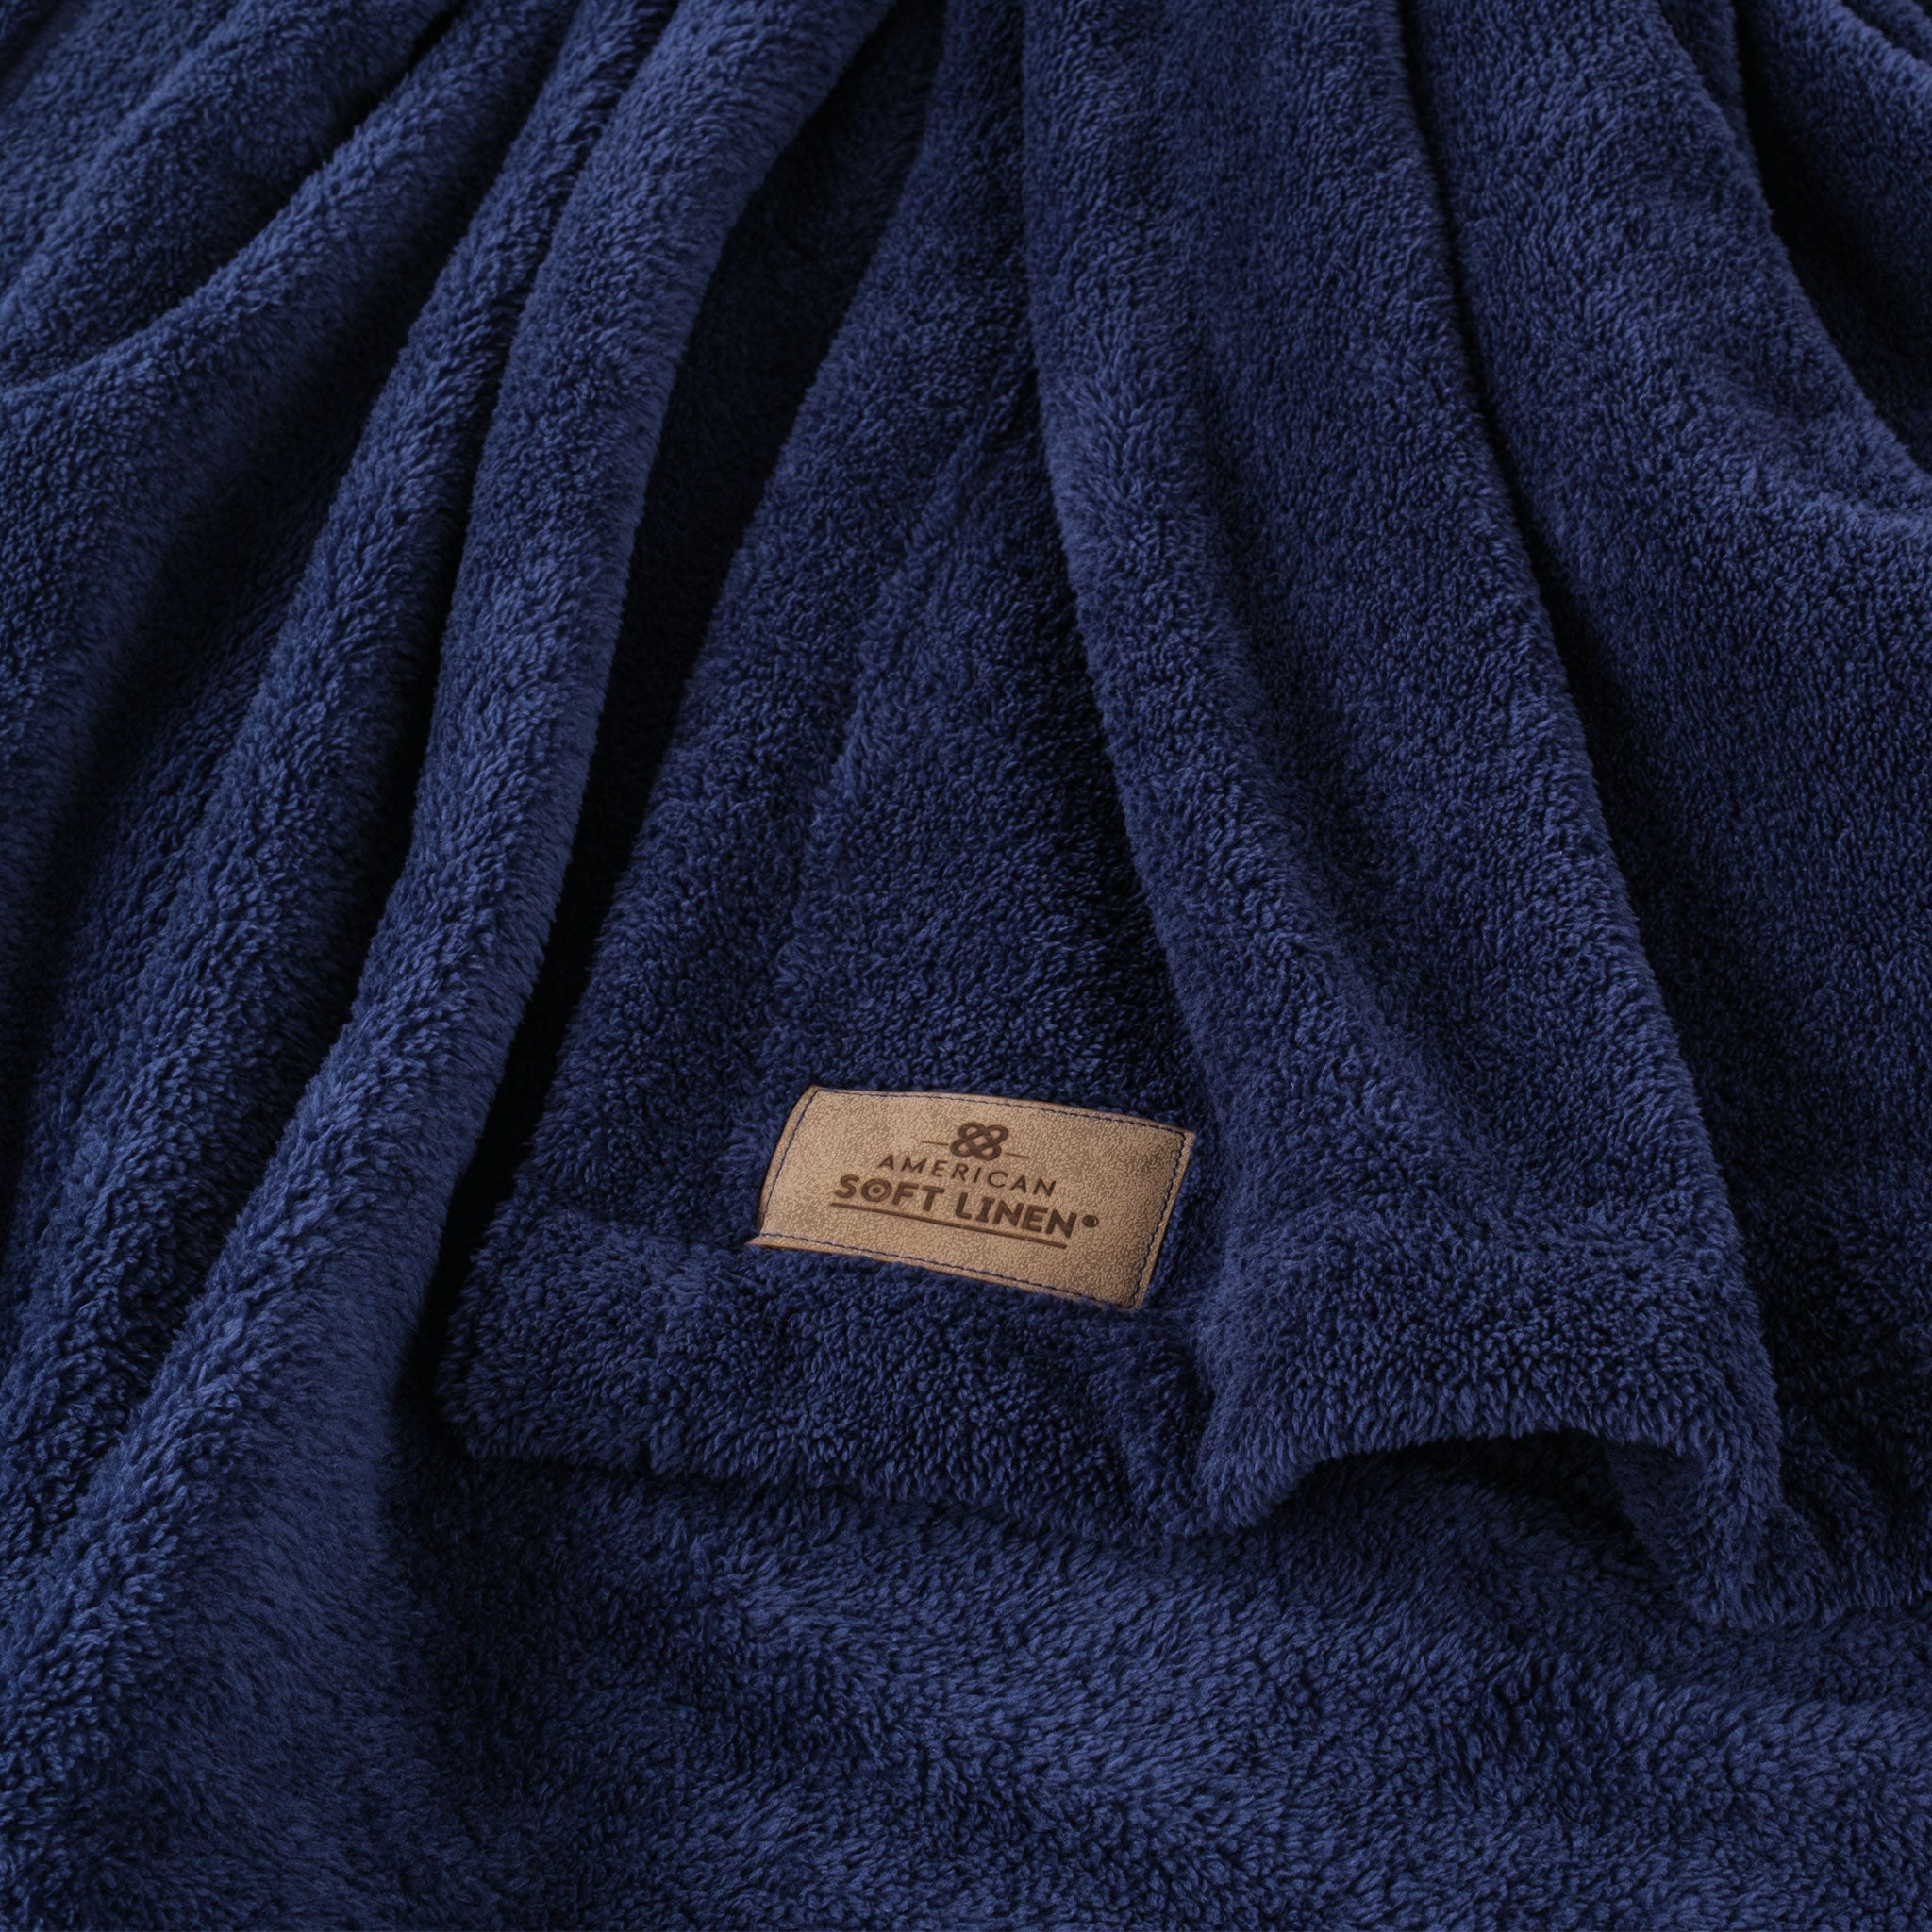 American Soft Linen - Bedding Fleece Blanket - Wholesale - 24 Set Case Pack - Throw Size 50x60 inches - Navy-Blue - 4